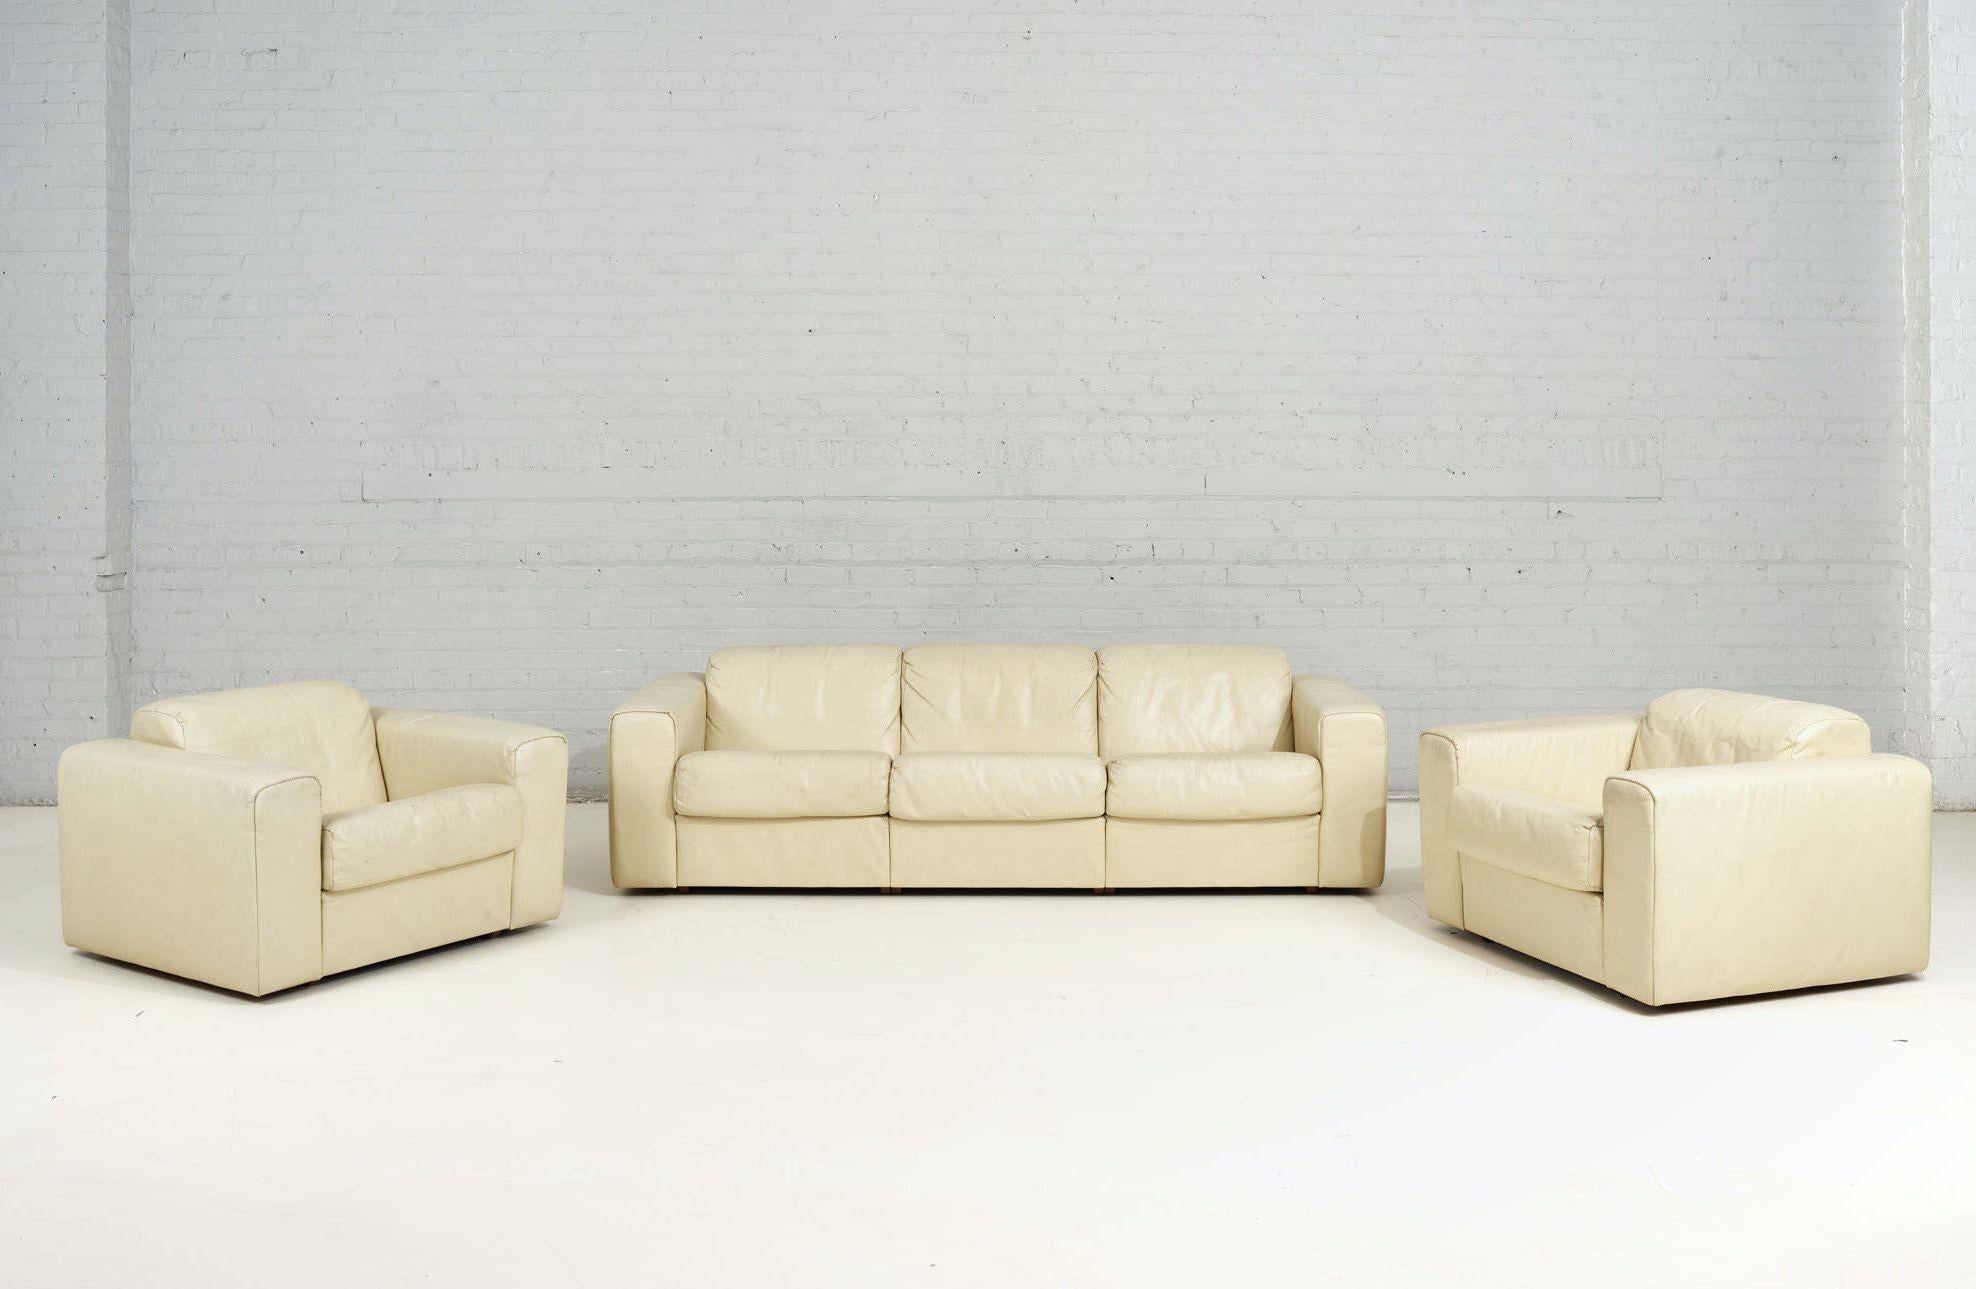 Baron Sofa by Robert Haussmann for Stendig. cream leather, 1970. Original leather with beautiful patina. Pair of chairs are sold in separate listing.

